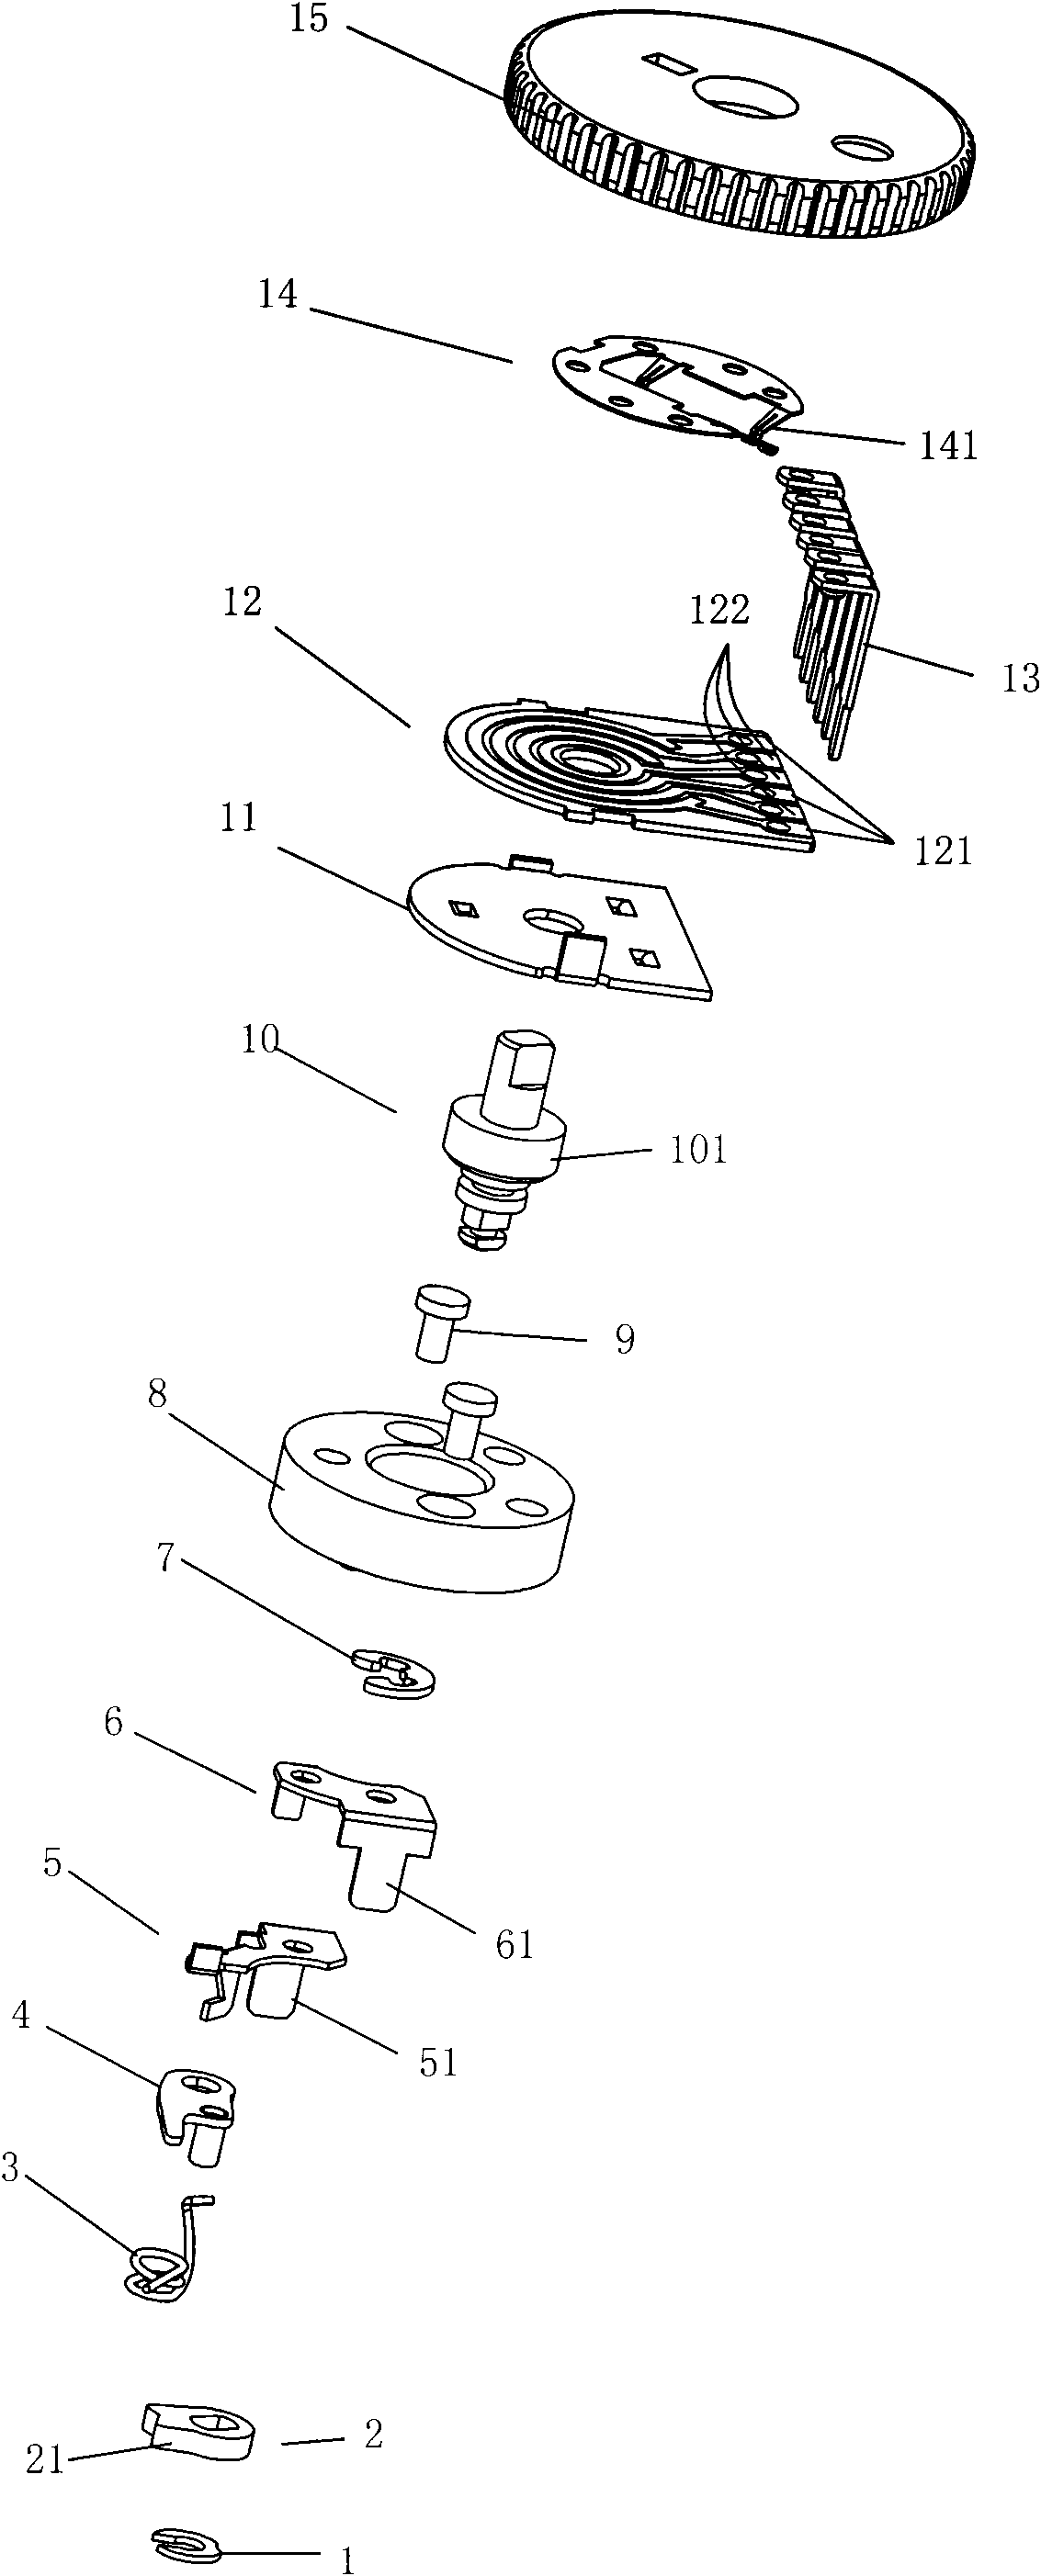 Thin dual-channel potentiometer with switch